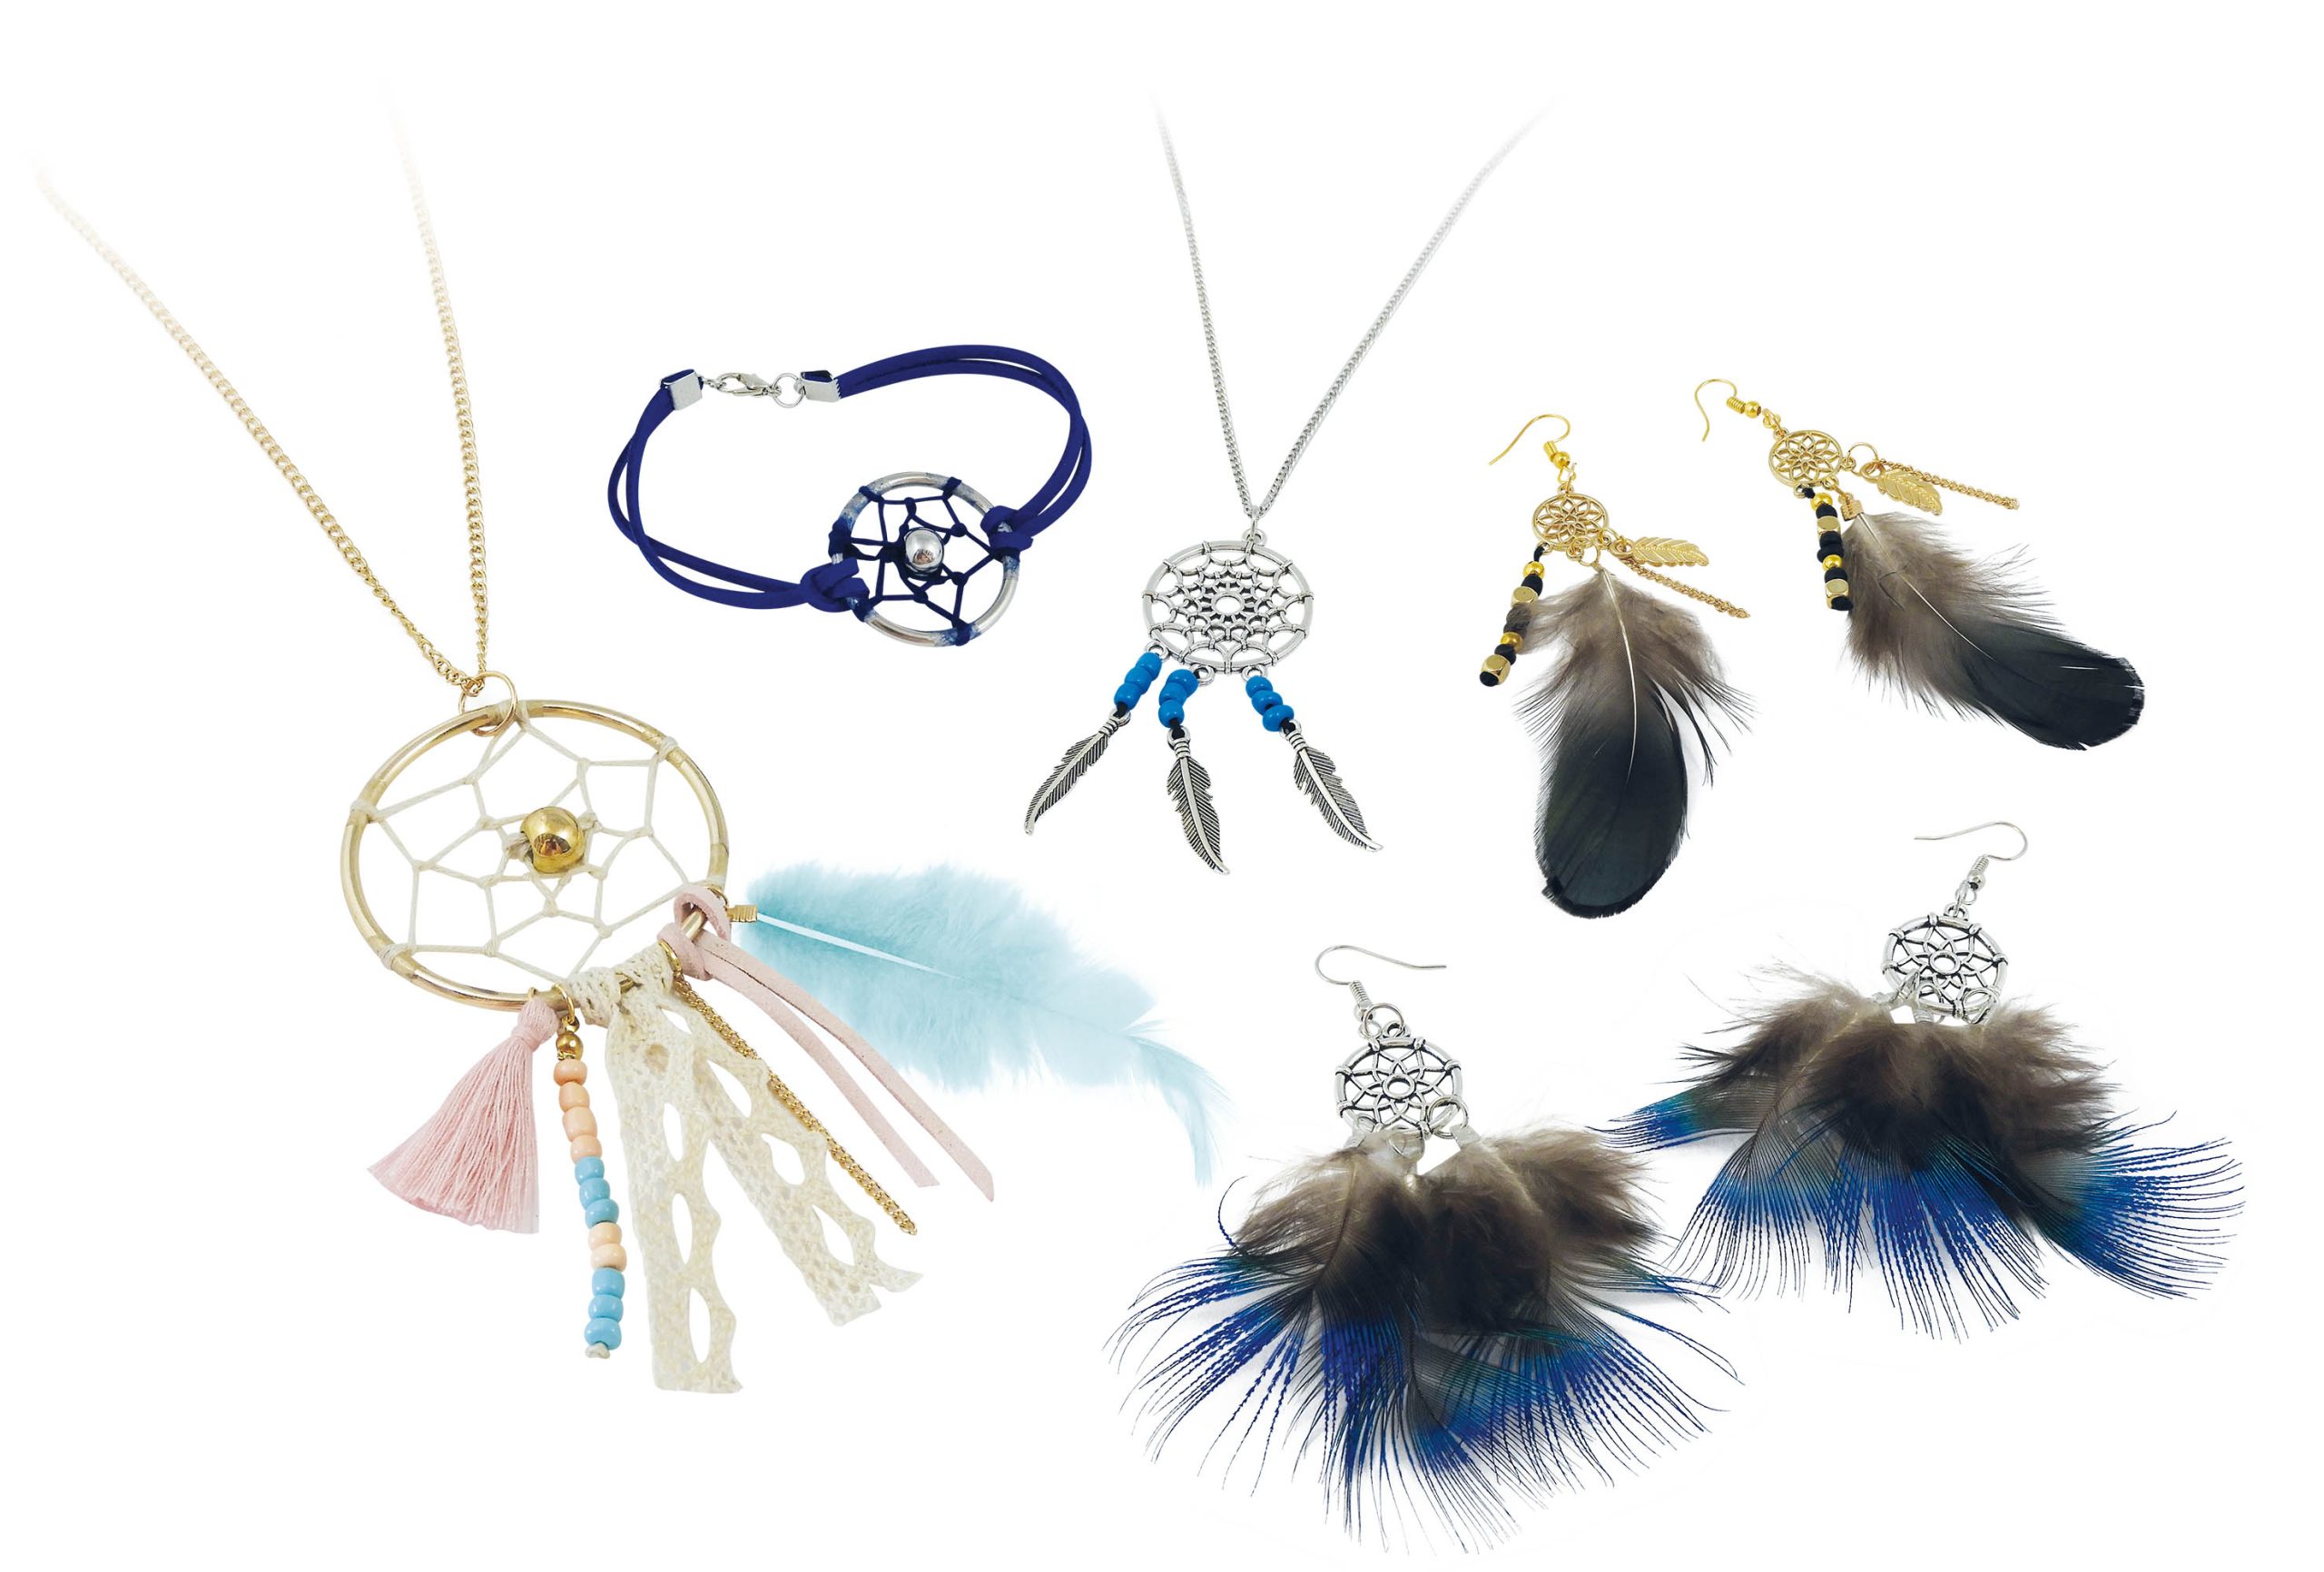 Be Teens - Dreamcatcher Jewellery. Created jewellery using this product.